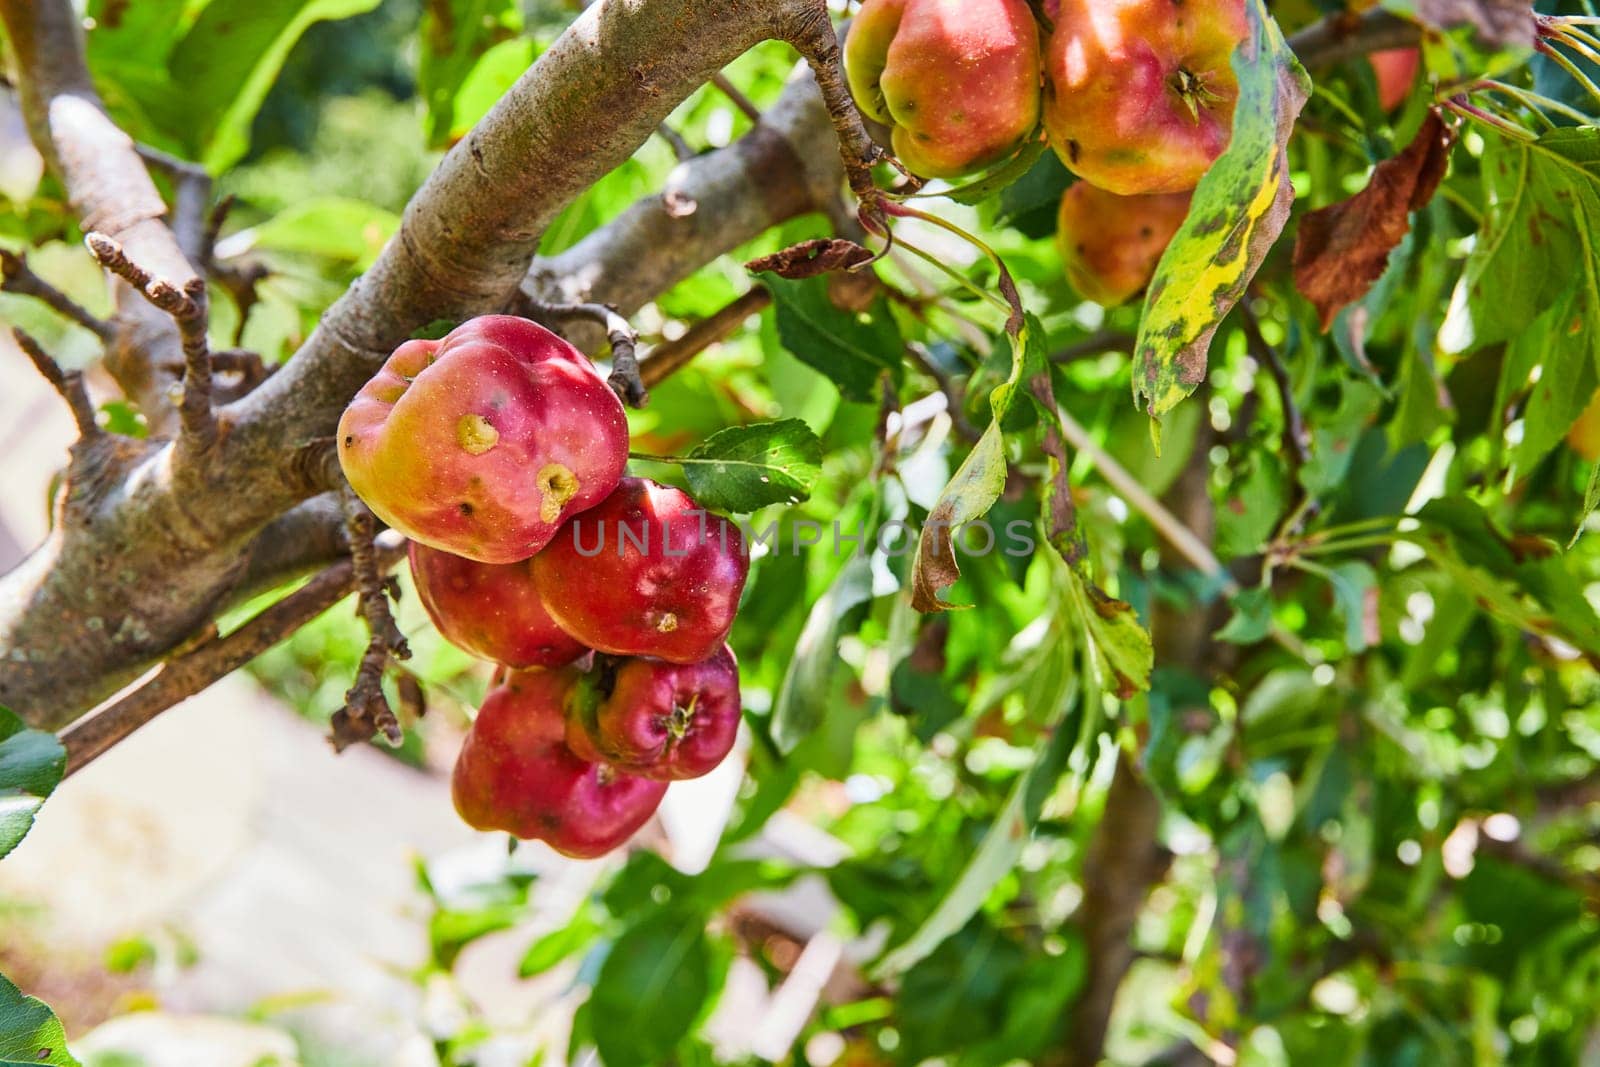 Ripe apples on a dwarf tree in Botanic Gardens, Elkhart, Indiana, captured during peak harvest season in 2023, showcasing organic agriculture and the beauty of autumn.